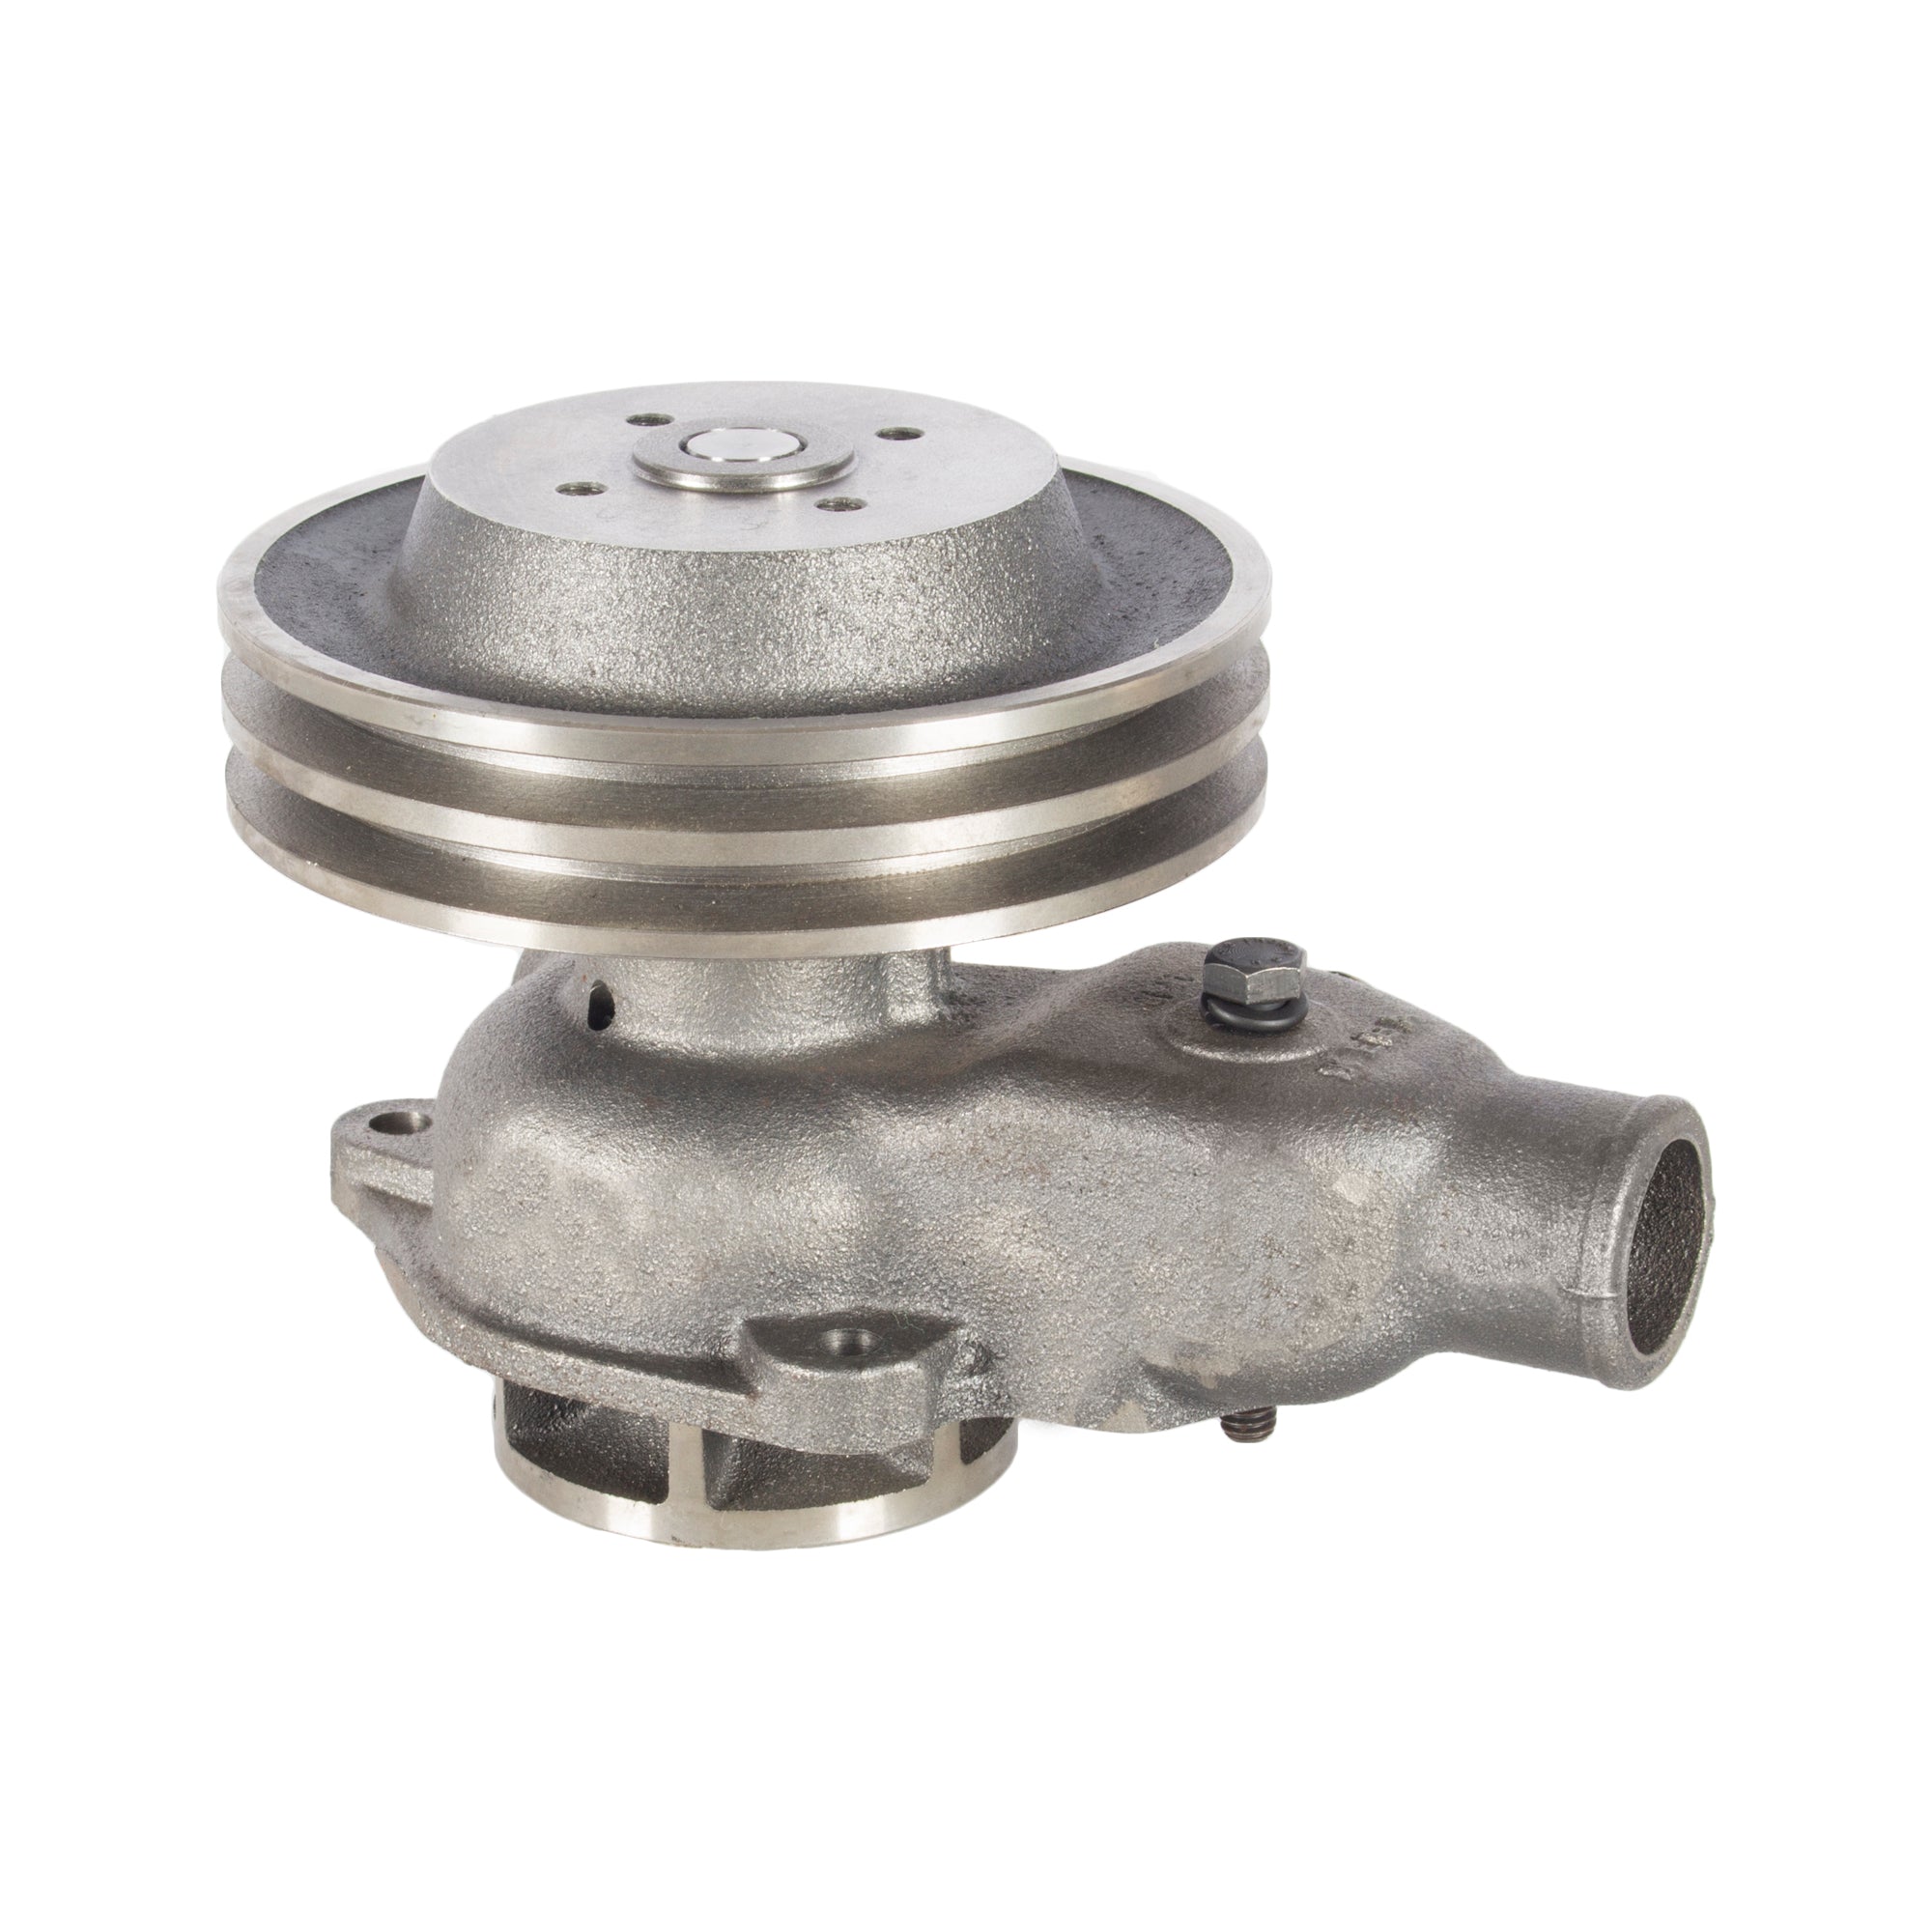 Water Pump Replacement for Willys;M38A1,M38 WO-800002